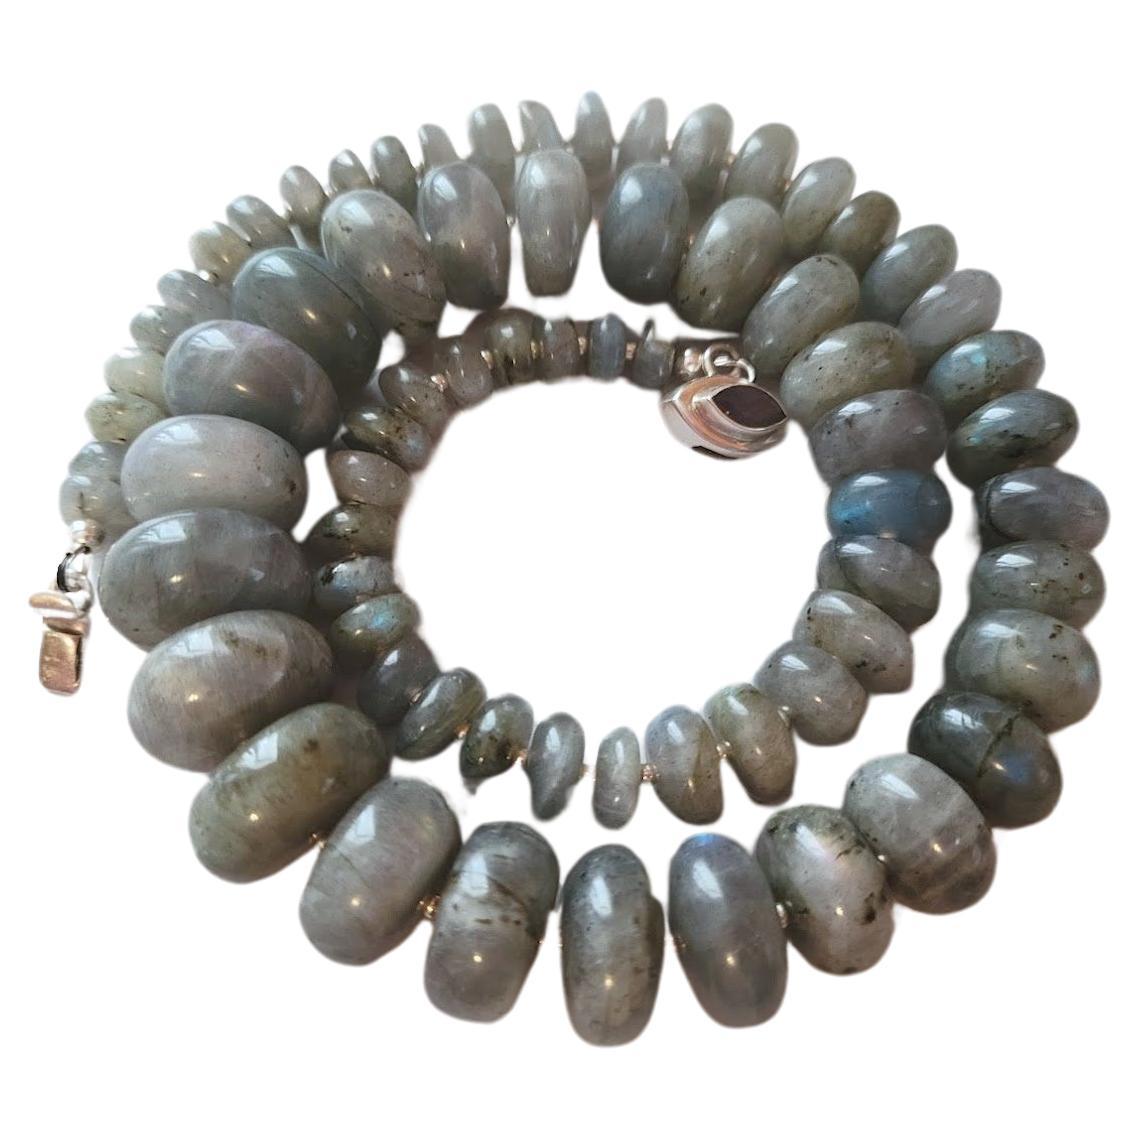 Labradorite Rondelle Beads Necklace For Sale